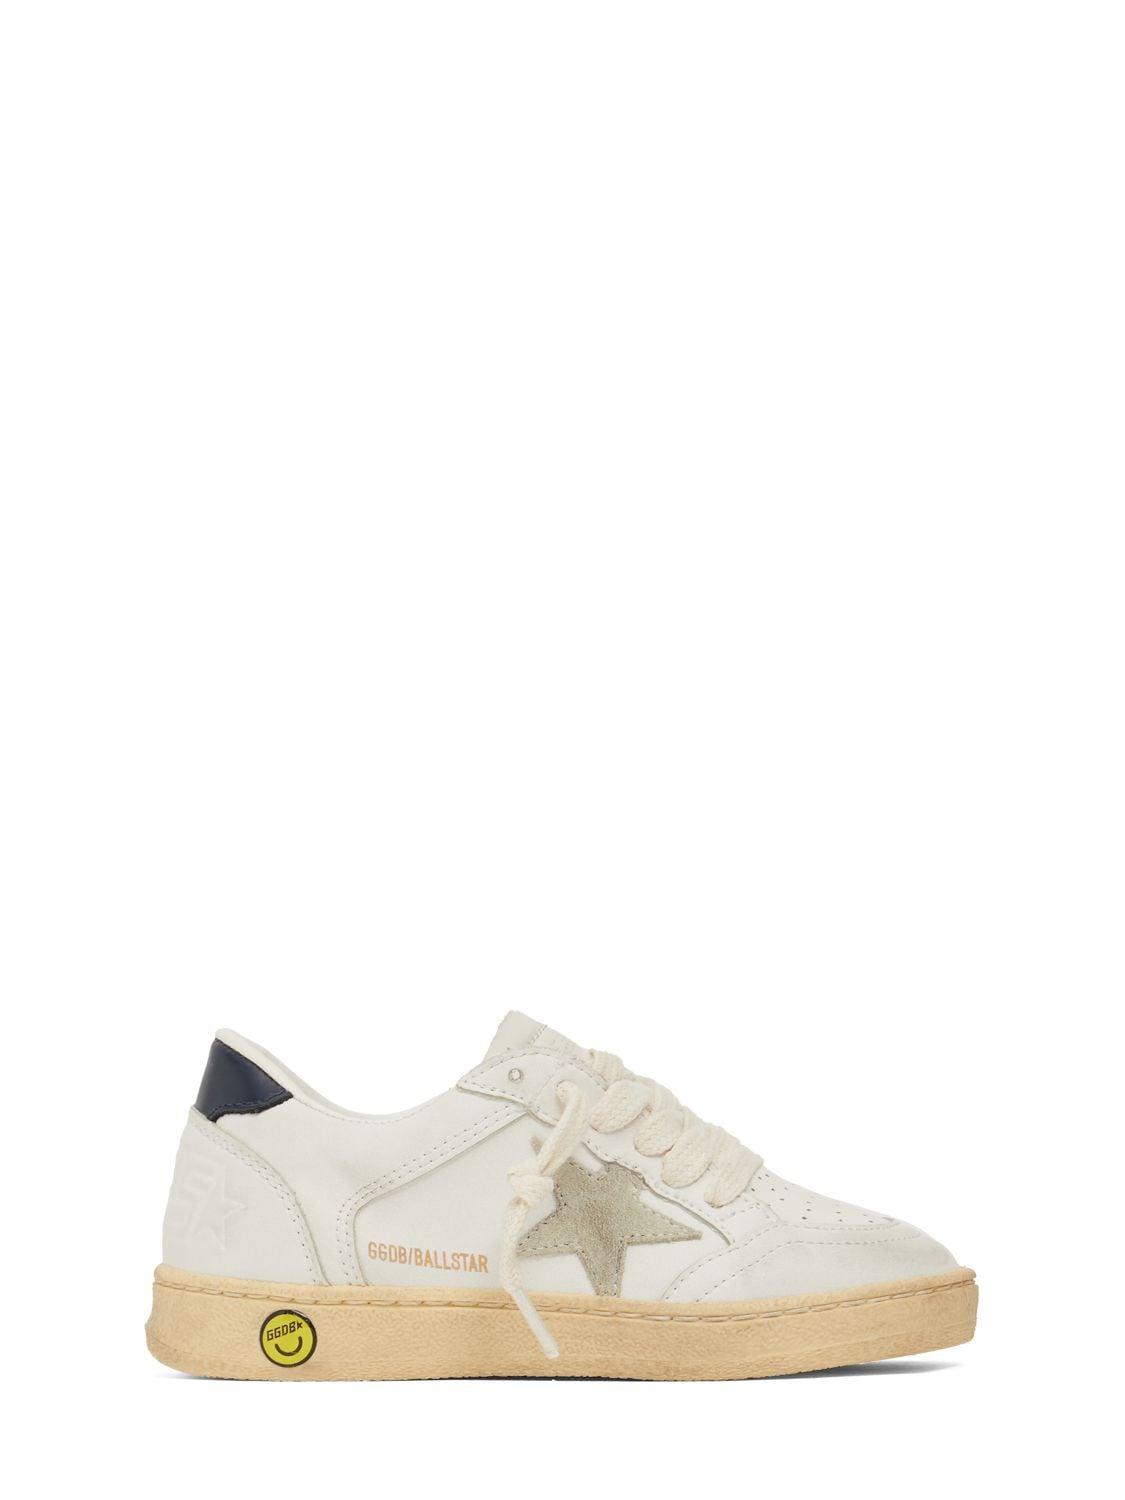 Golden Goose Kids' Ballstar Leather Lace-up Sneakers In White